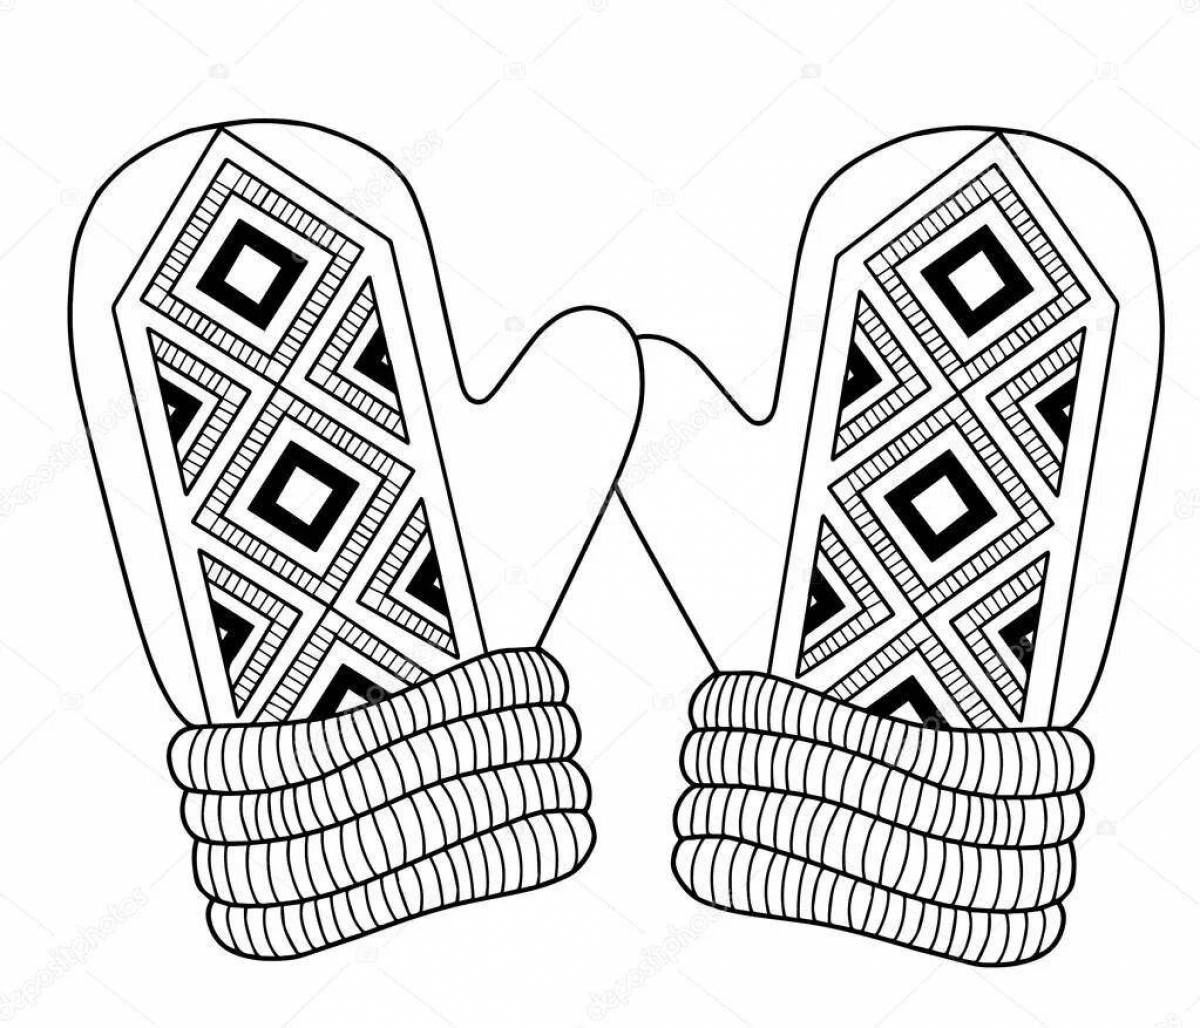 Joyful patterned mittens coloring book for kids